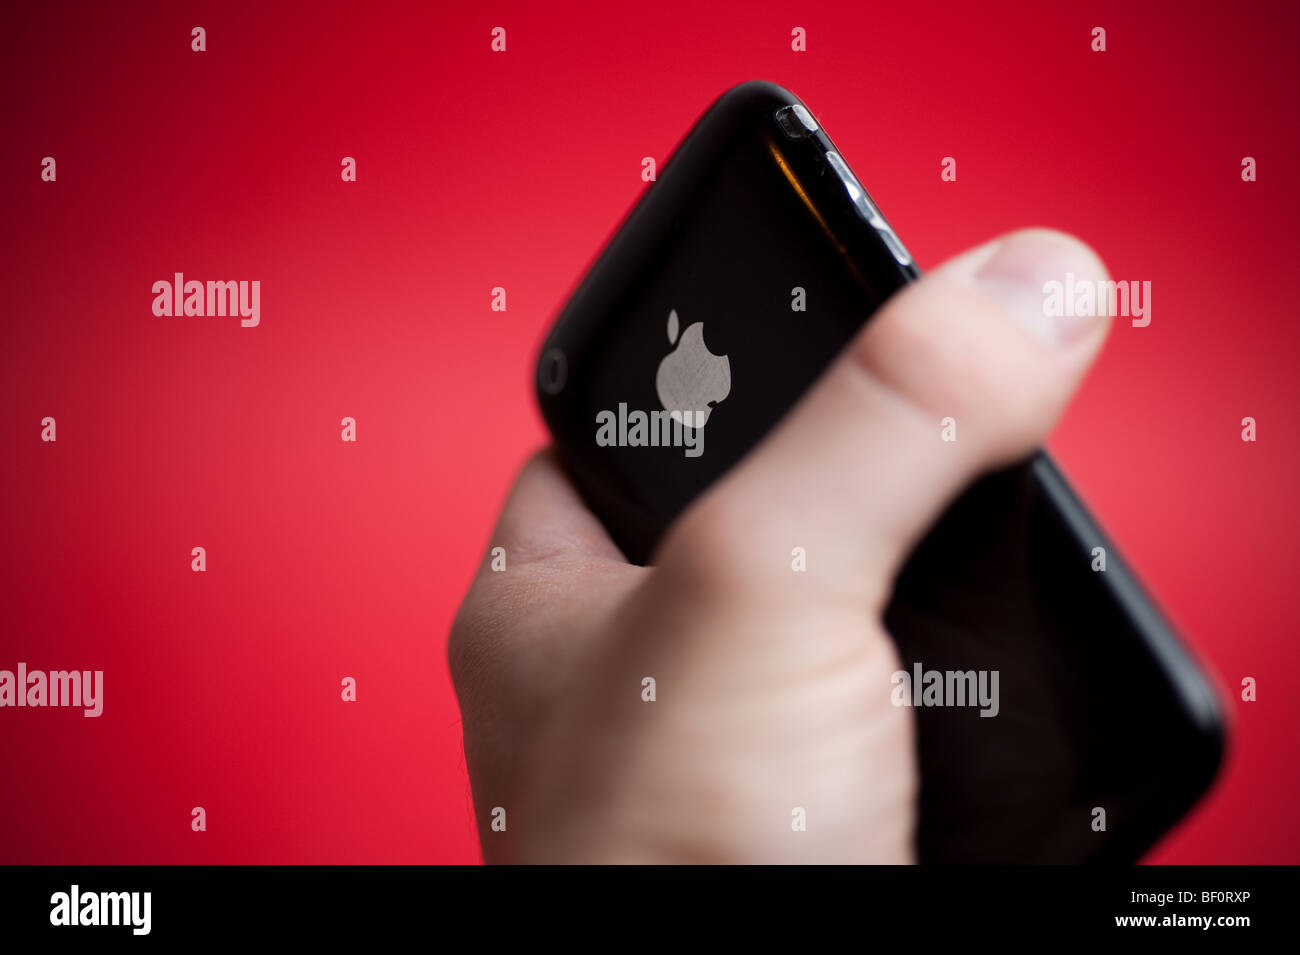 A black Apple iPhone 3G hand held in front of a red background. Stock Photo